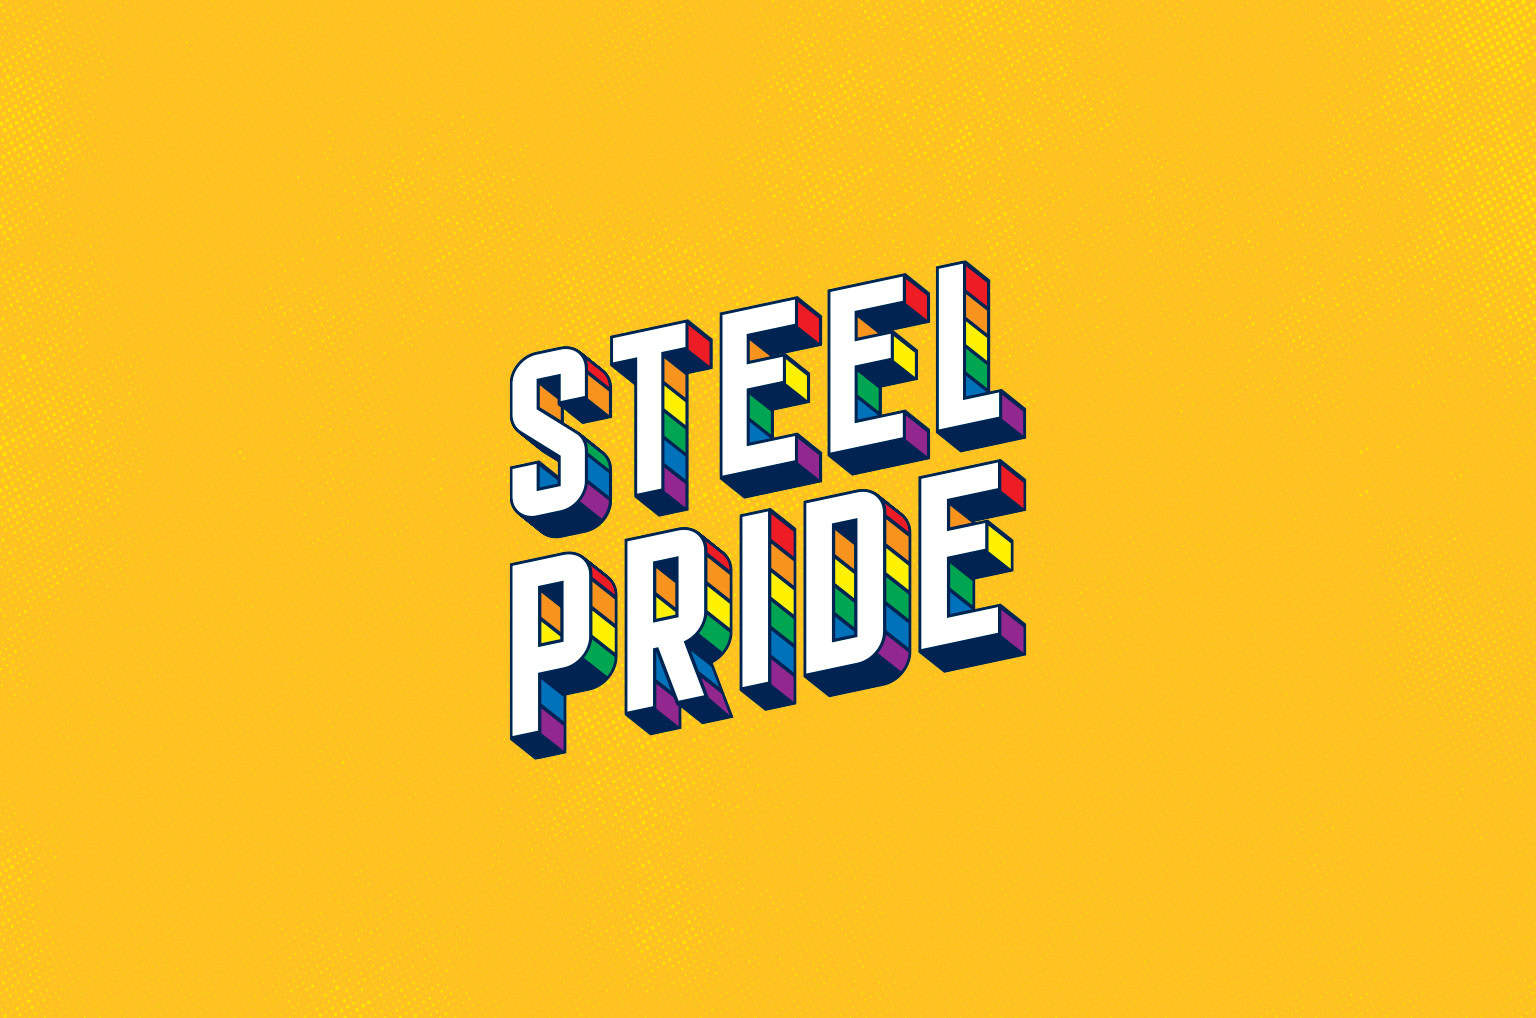 An image with yellow background and text that says Steel Pride. The text has a rainbow shadow-like design.